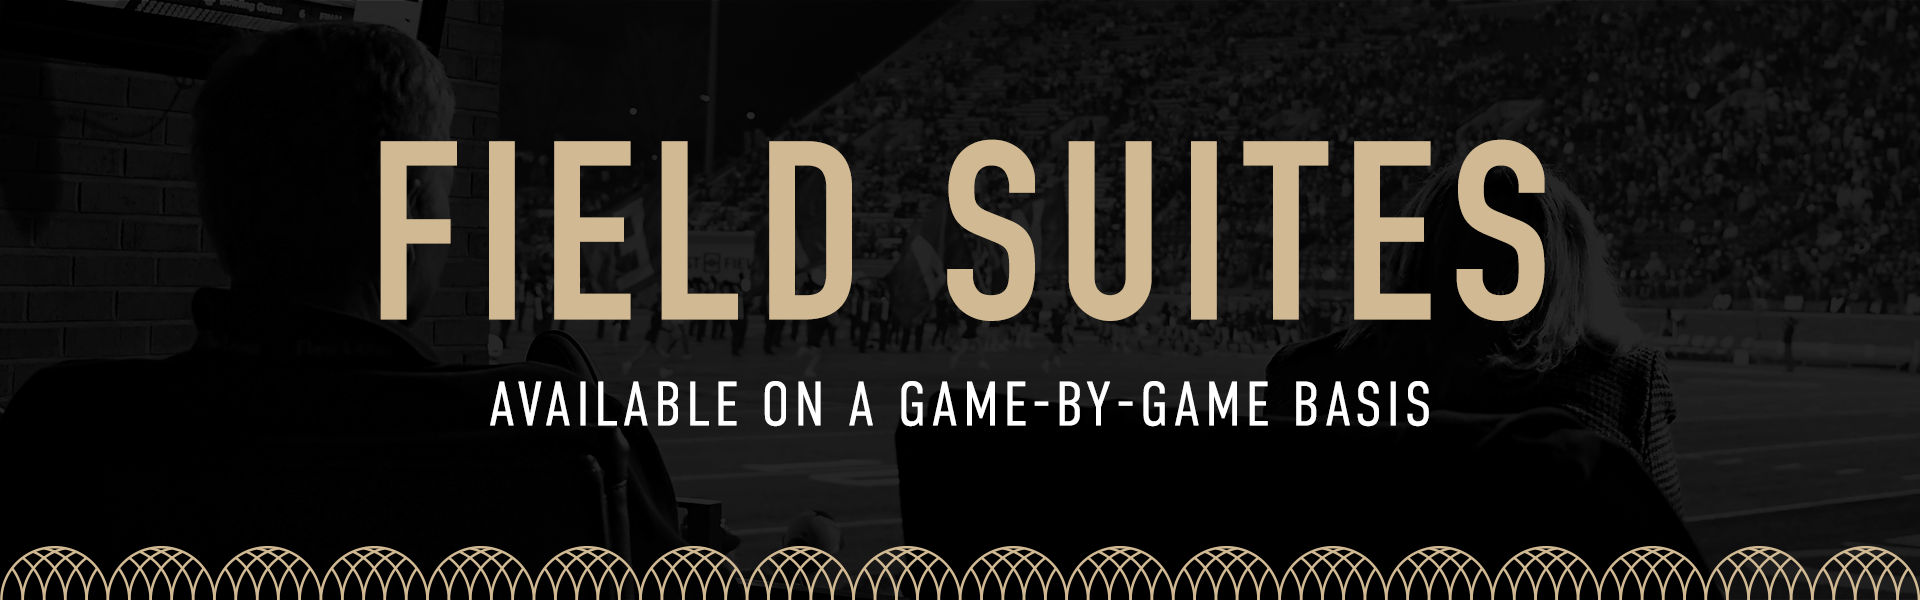 Field Suites | Available on a Game-by-Game Basis